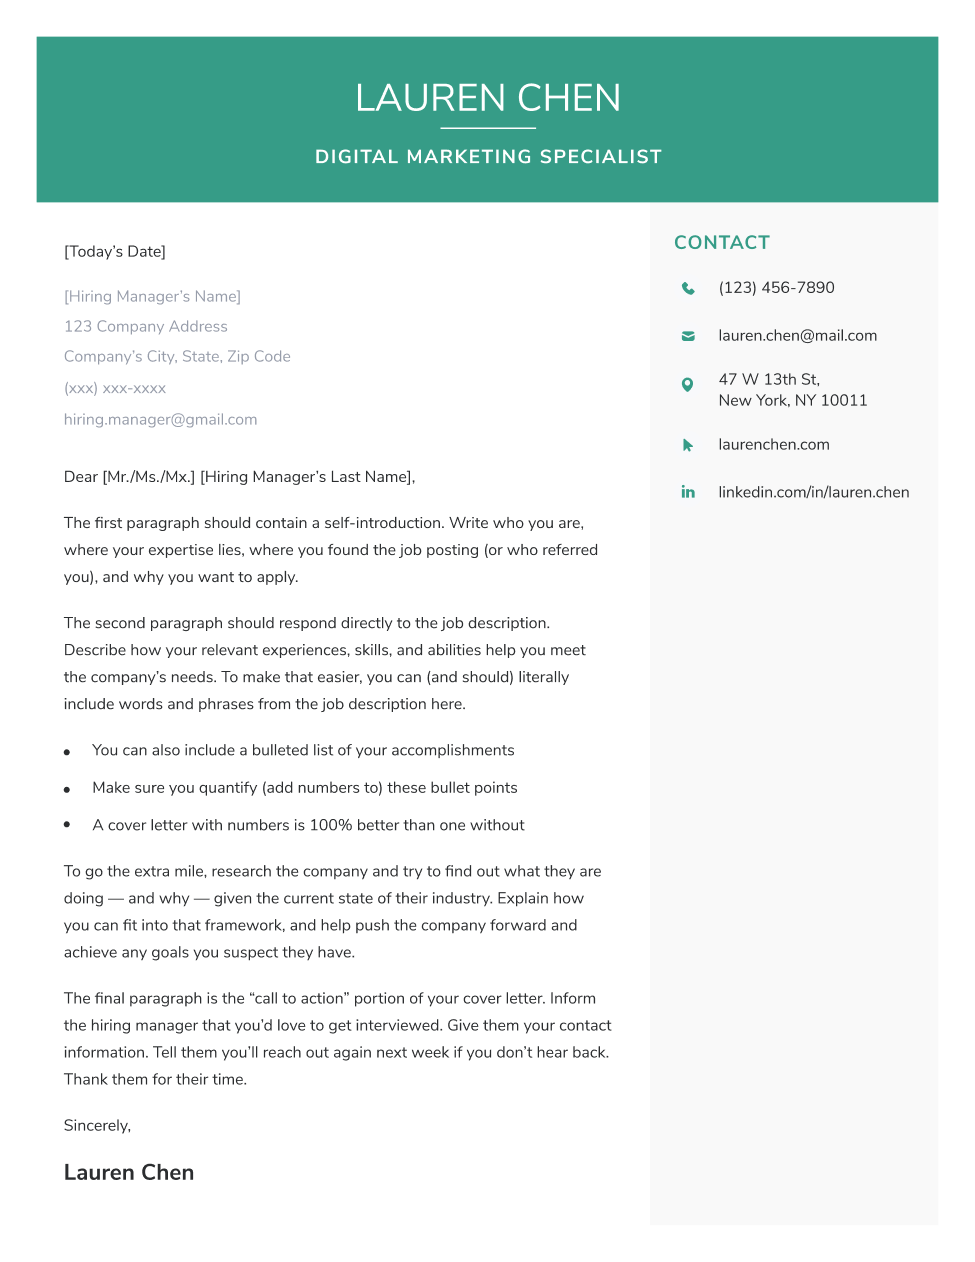 Corporate cover letter template in green, featuring a modern gray sidebar for your contact information.